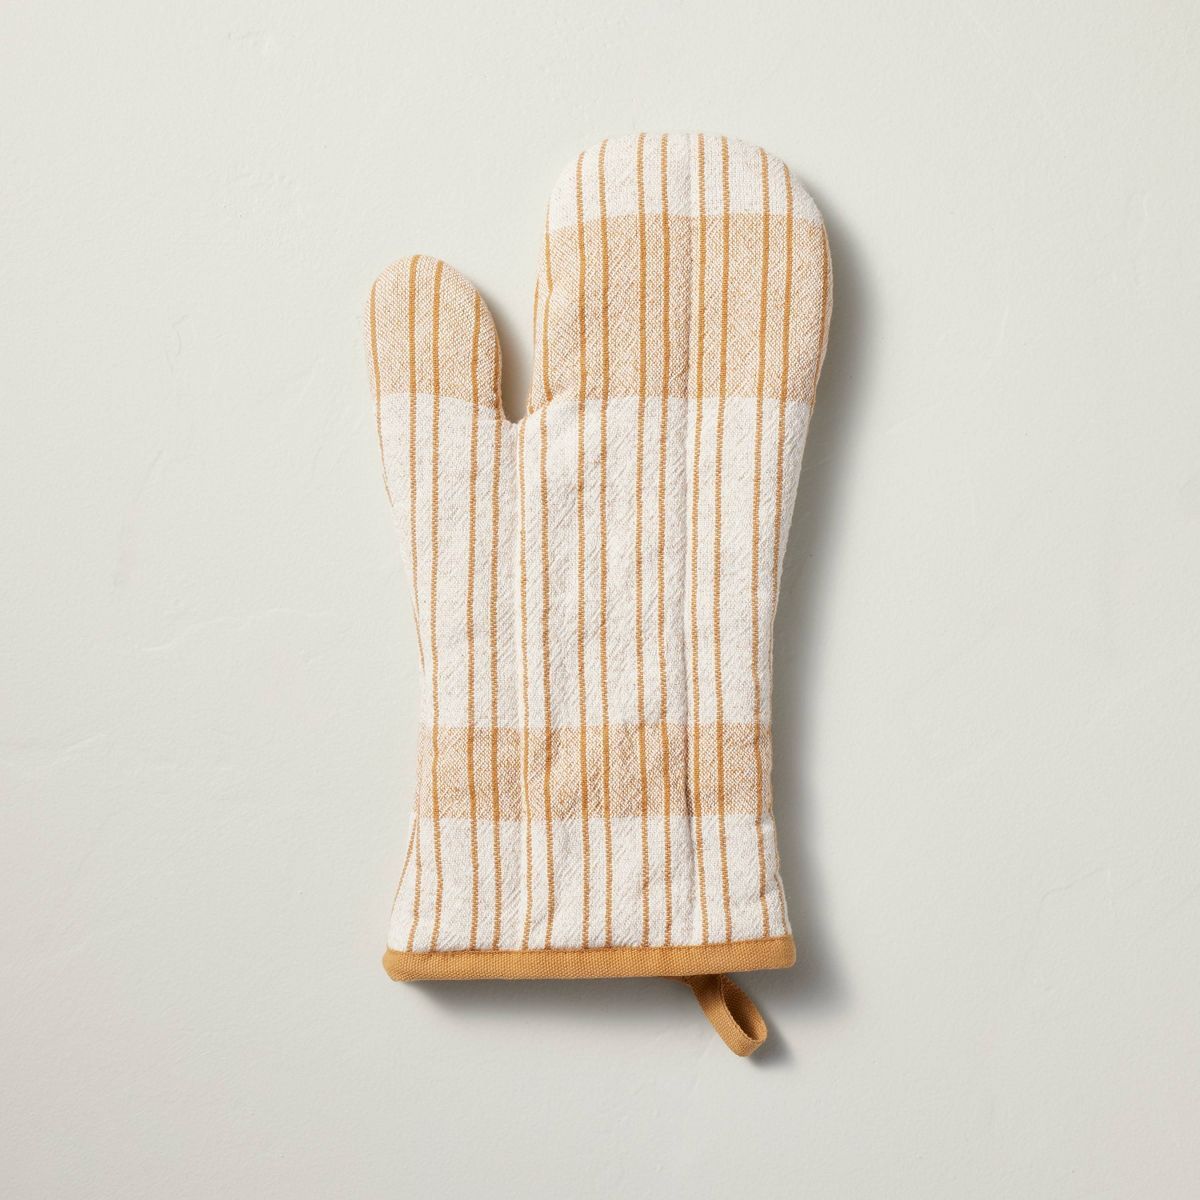 Offset Plaid Stripe Oven Mitt Tan/Natural - Hearth & Hand™ with Magnolia | Target